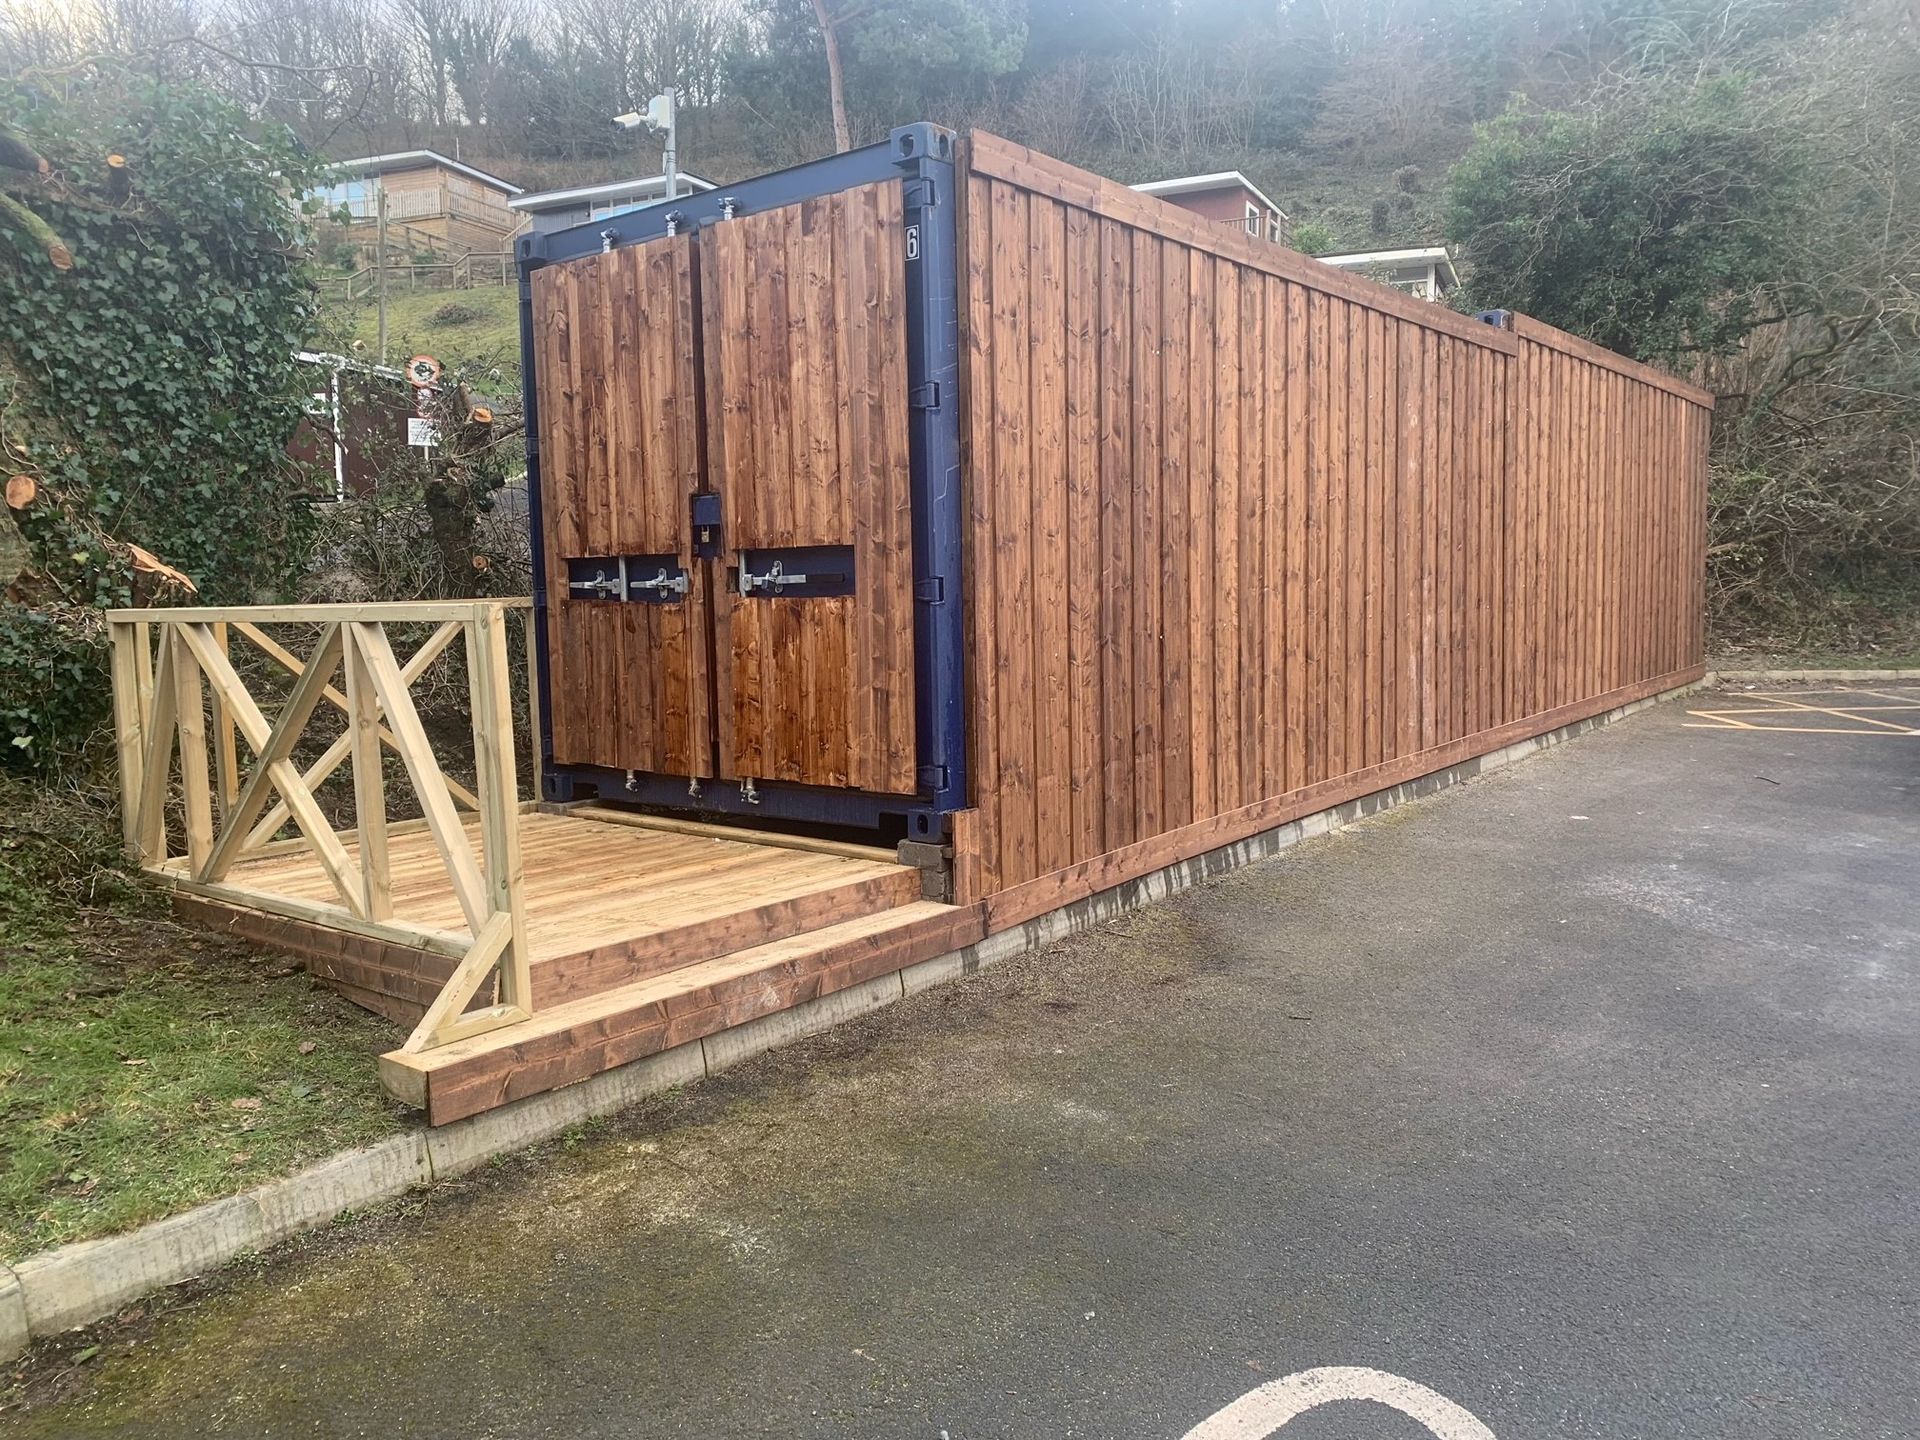 Caswell Hill Car Park with storage containers installed and cladded. Swansea